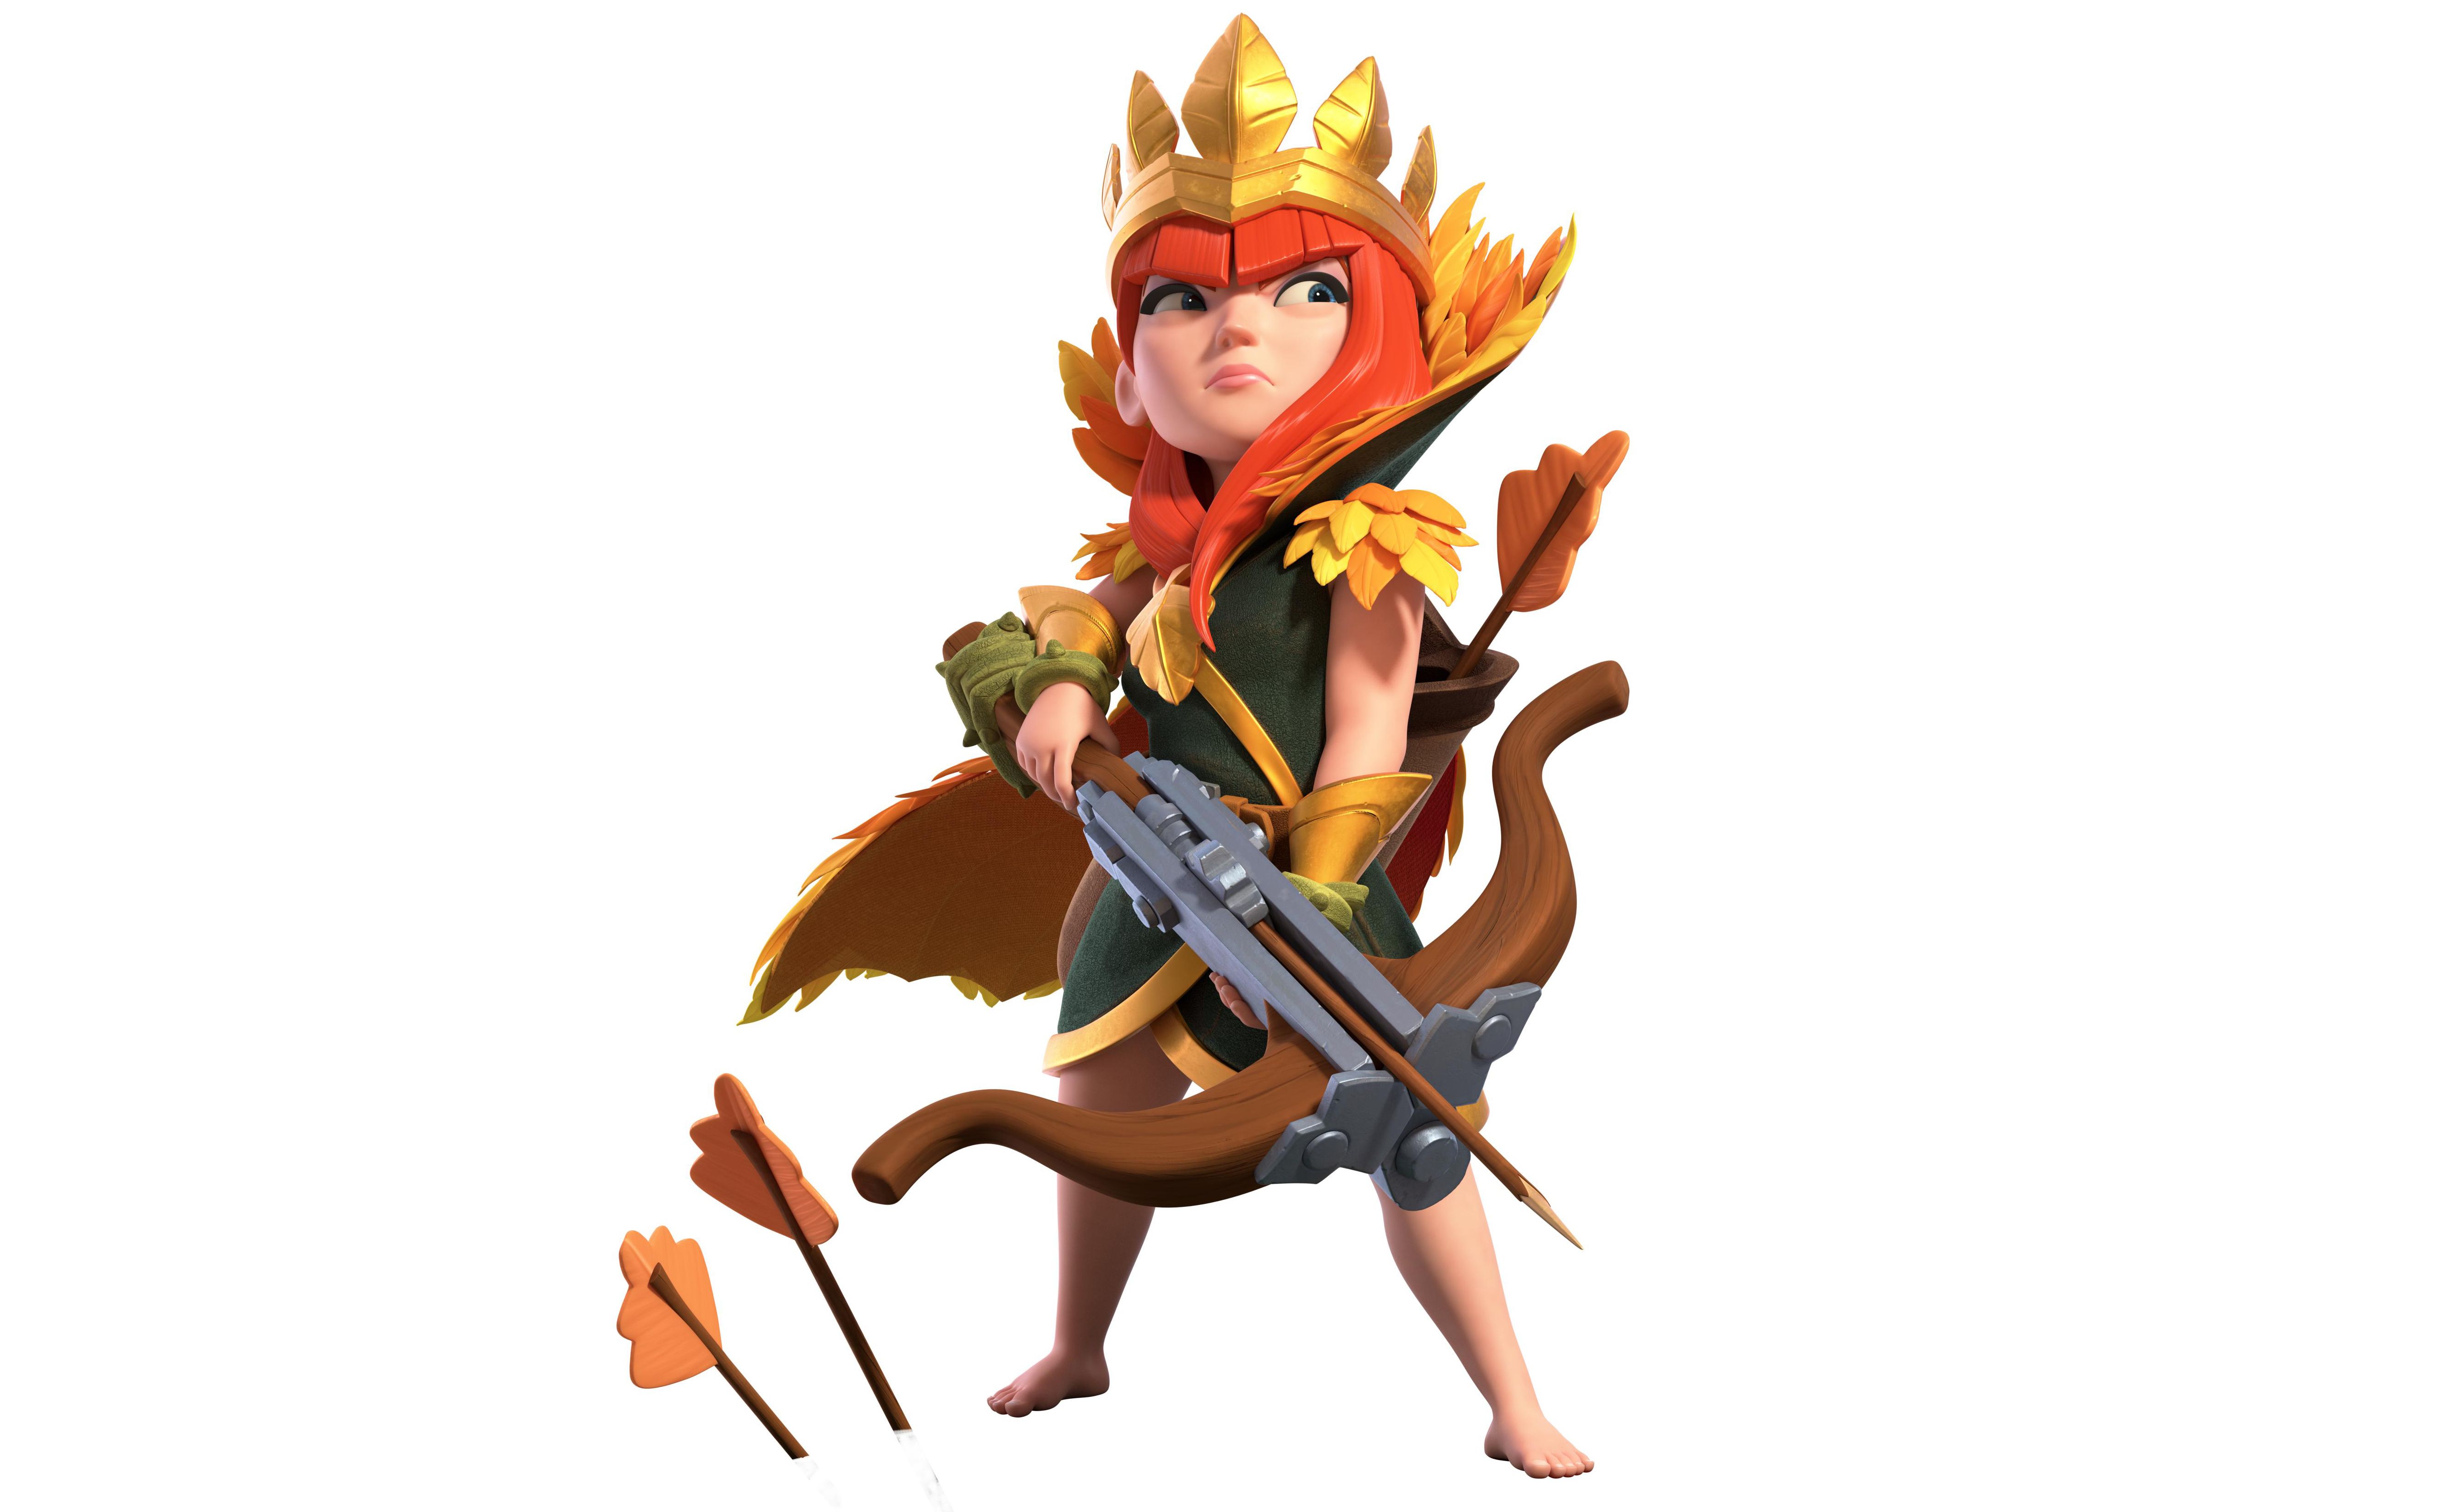 Meet Autumn Queen, the September Clash of Clans Skin + Gold Pass Giveaway.